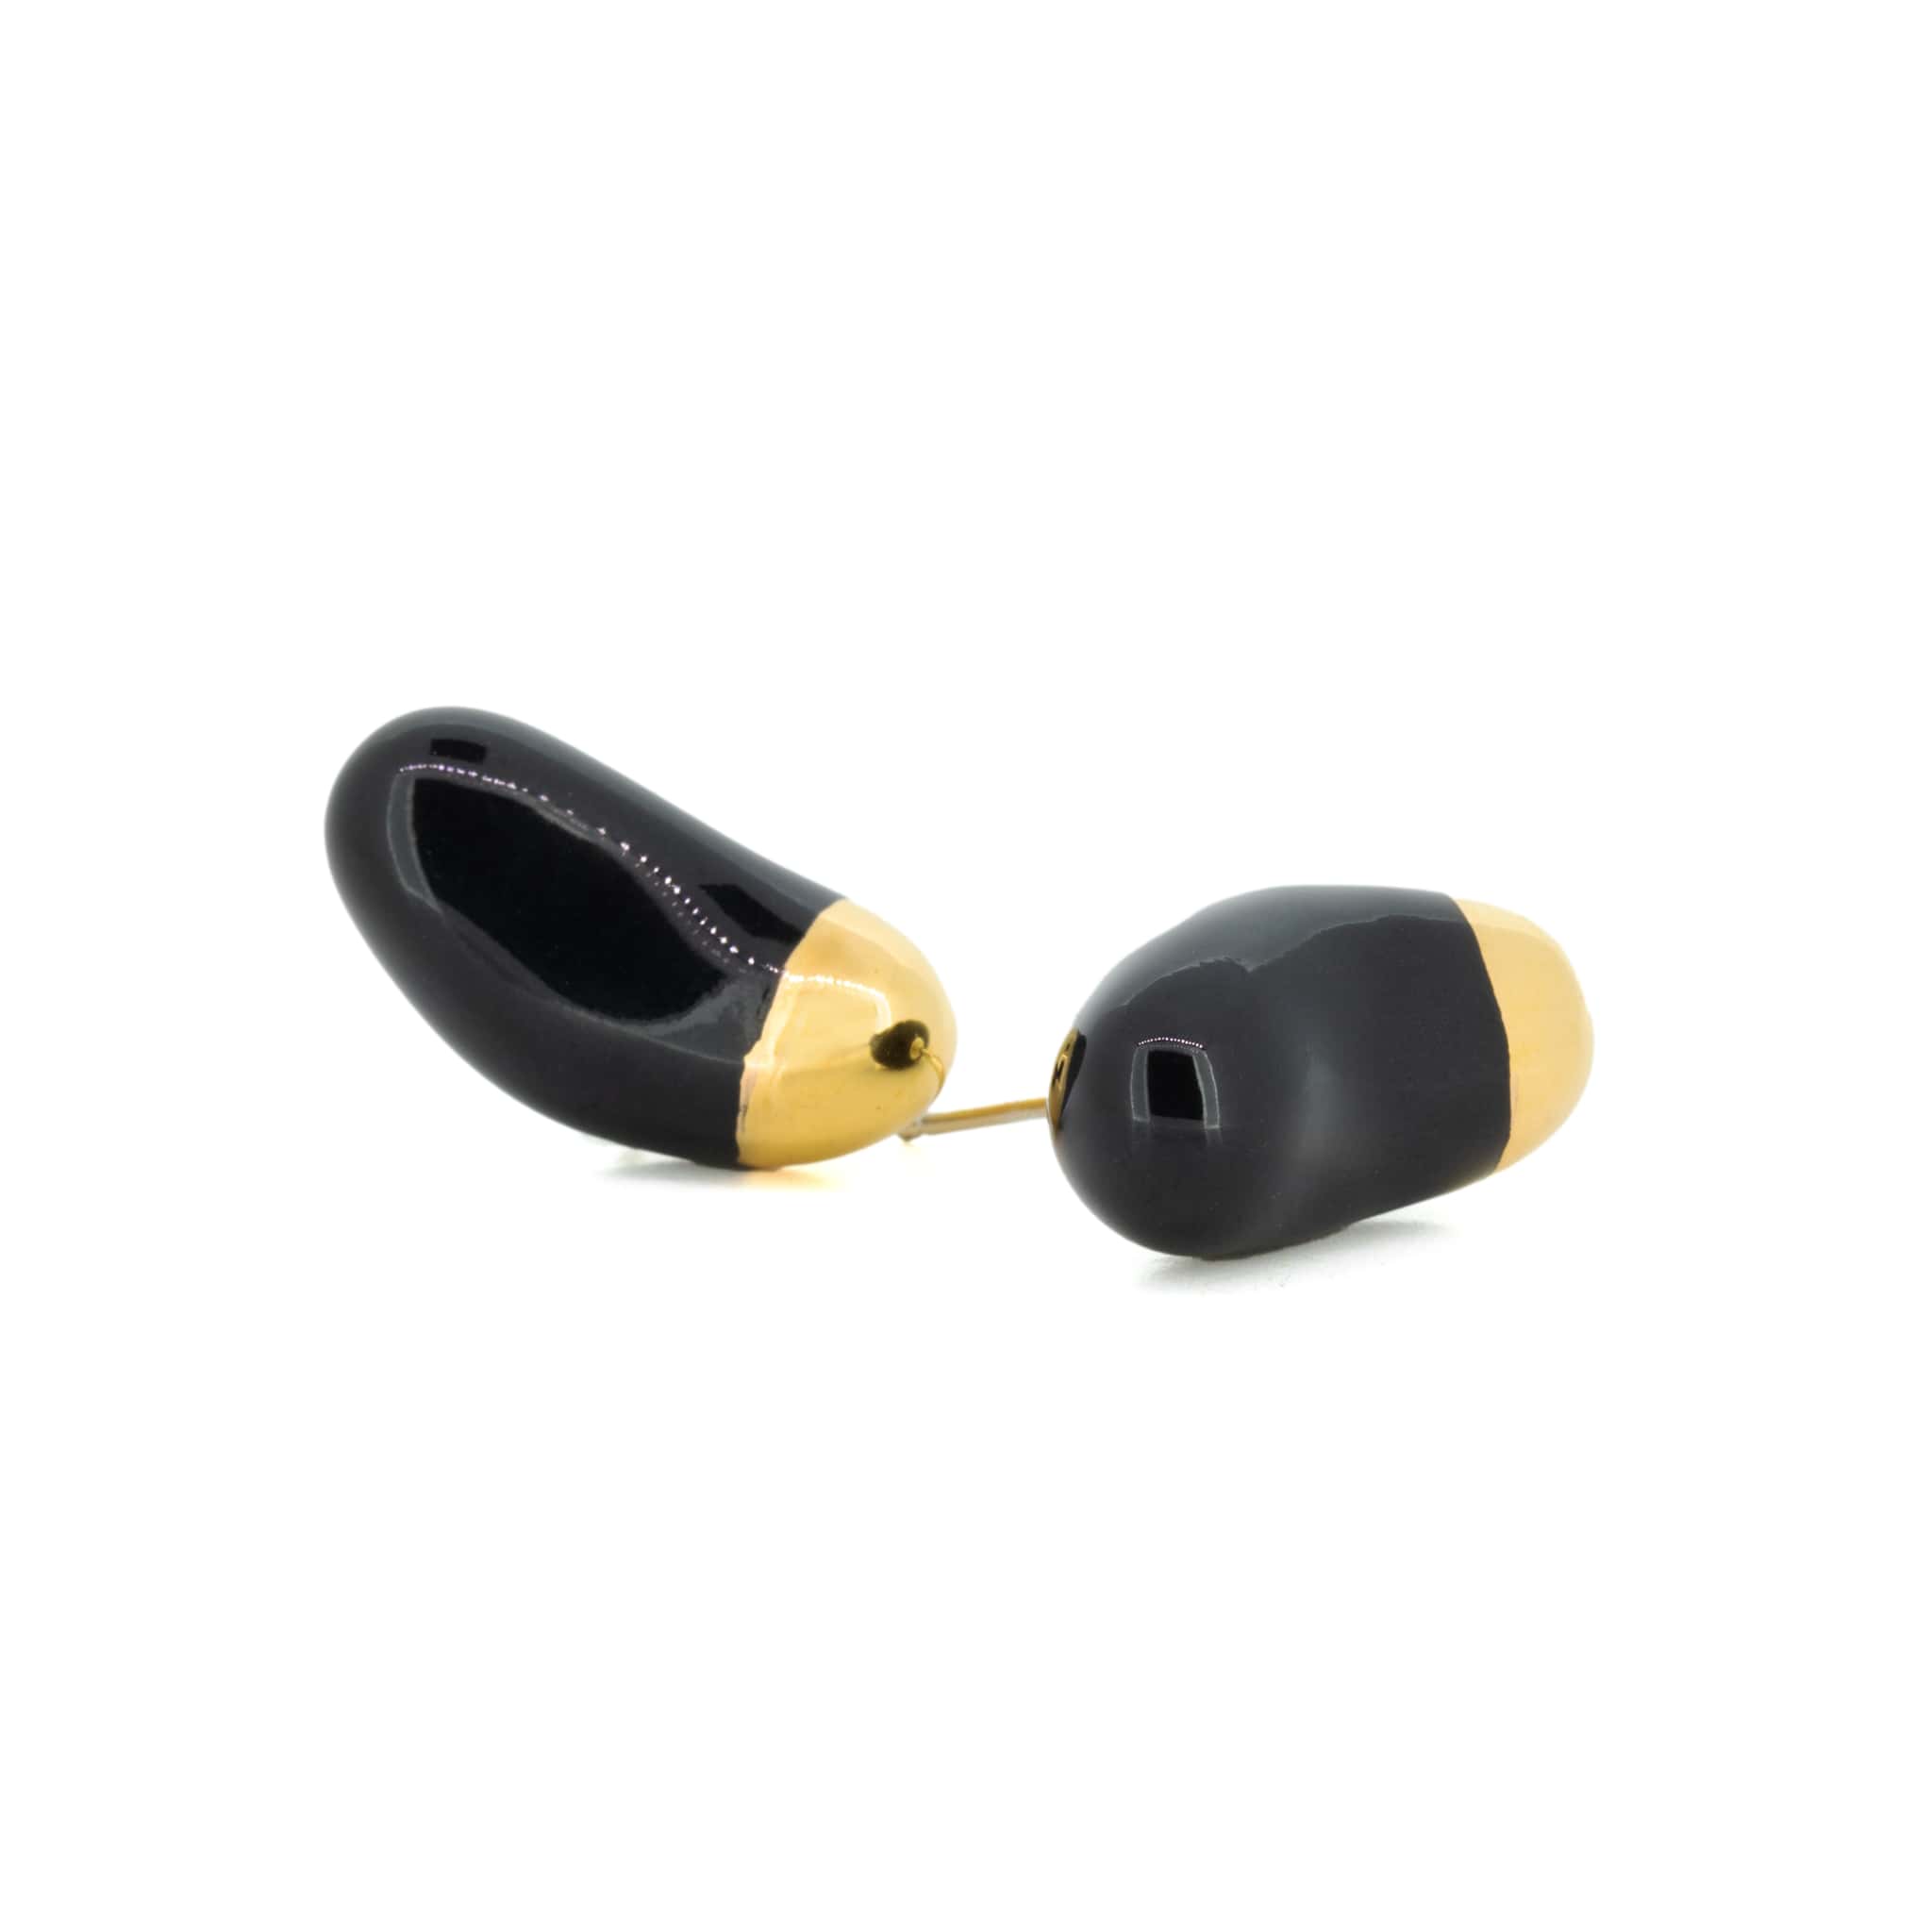 Black Jelly Beans Earrings With Gold